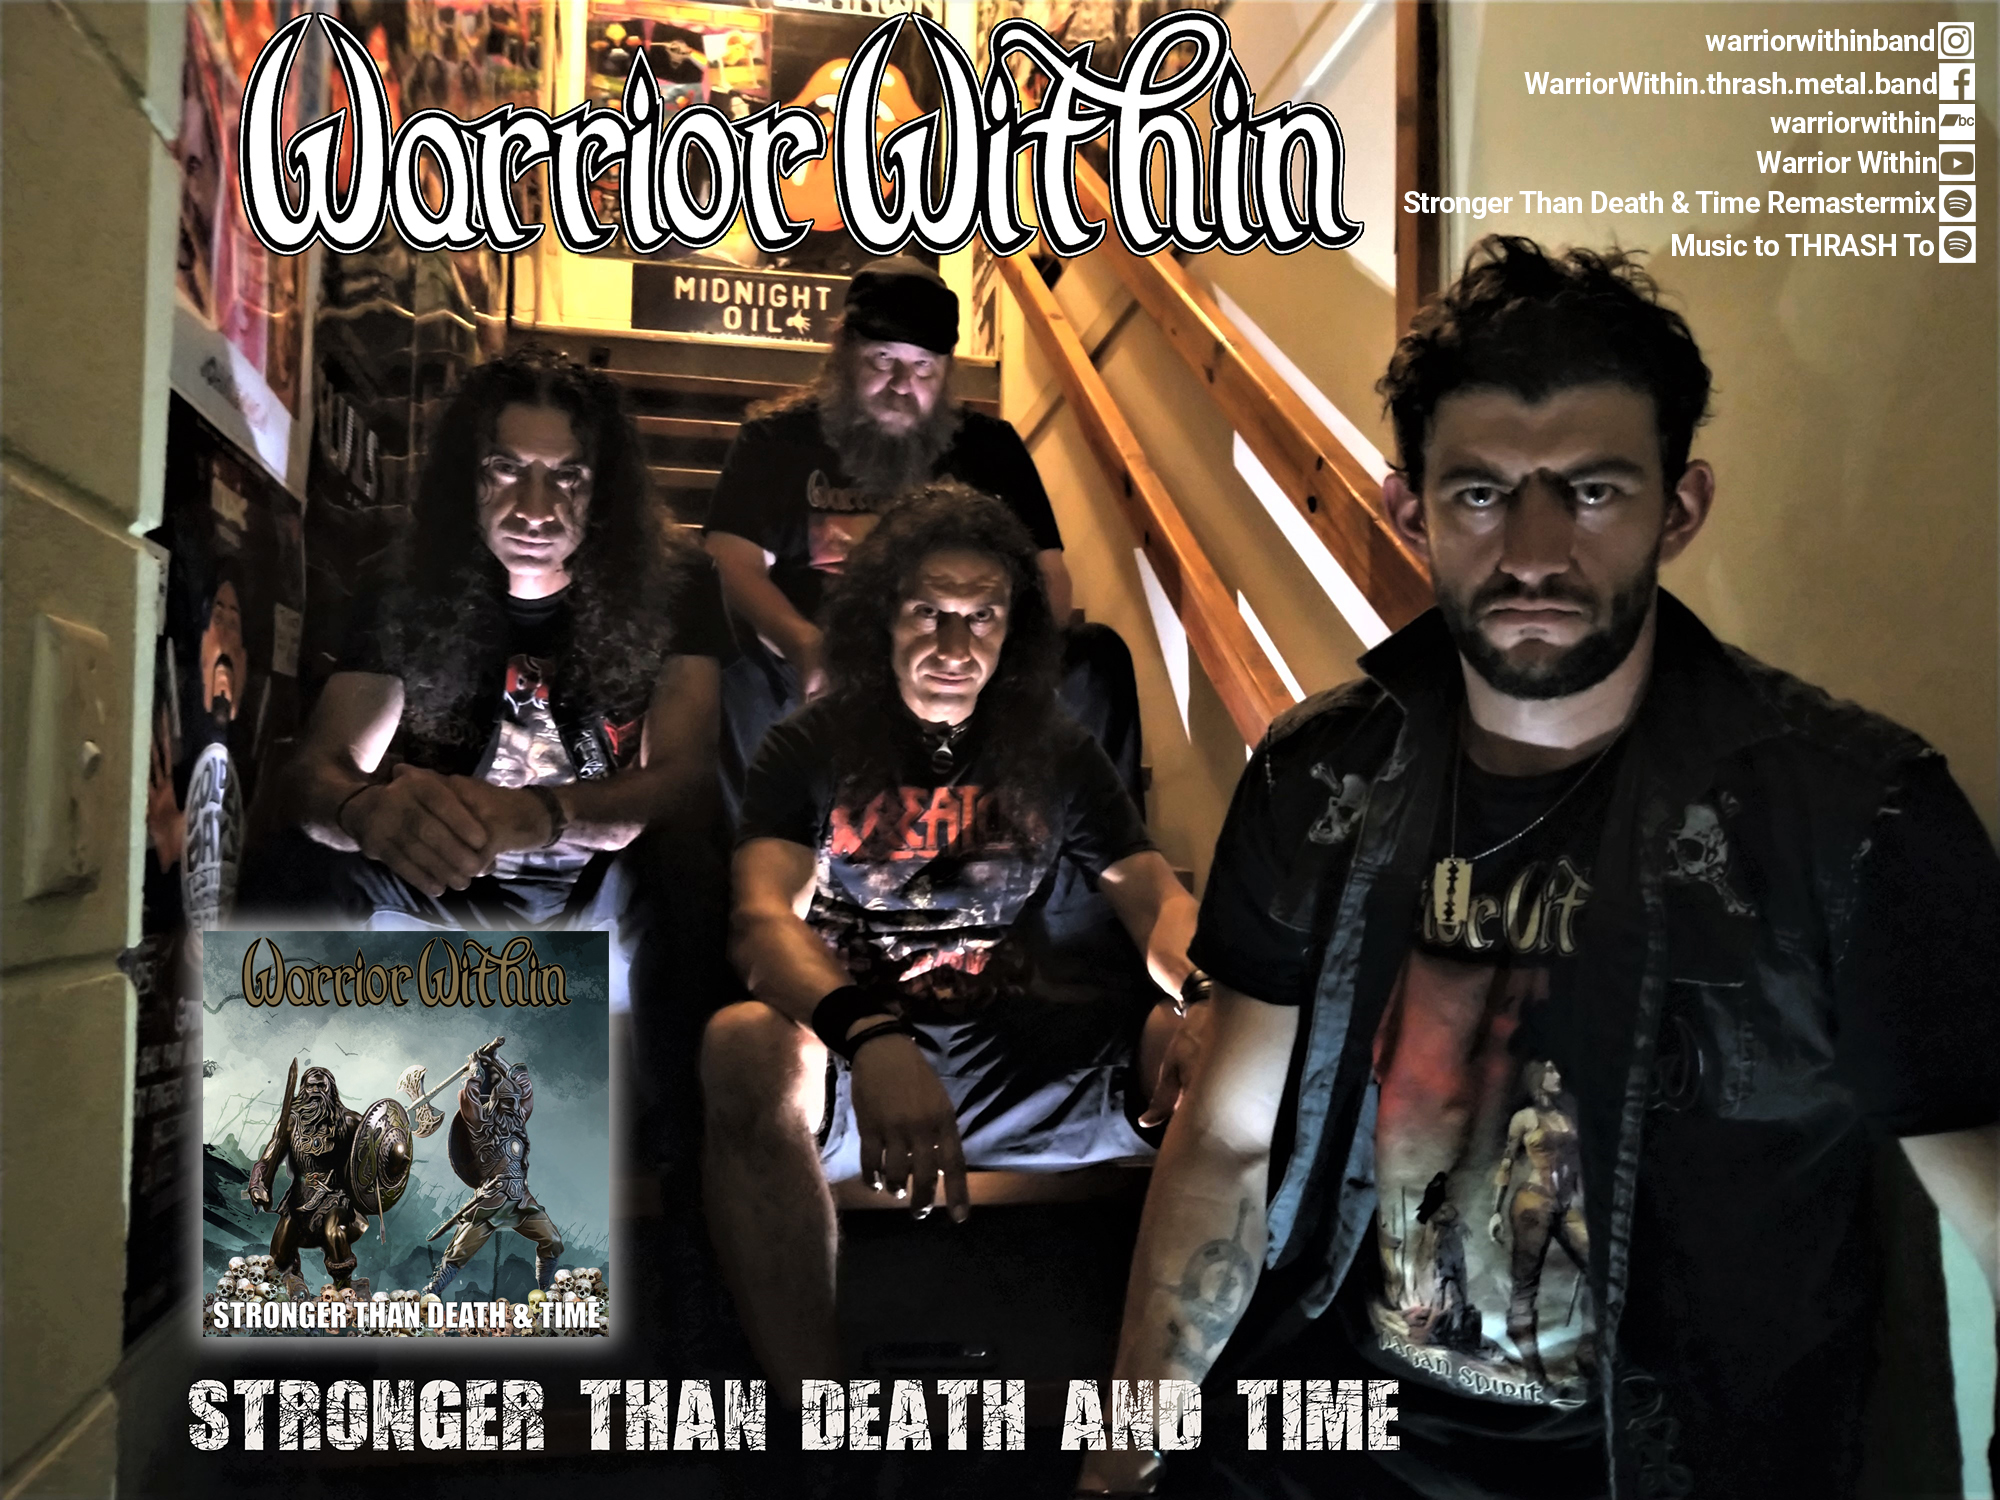 WARRIOR WITHIN – single “Stronger Than Death & Time” Remastermix